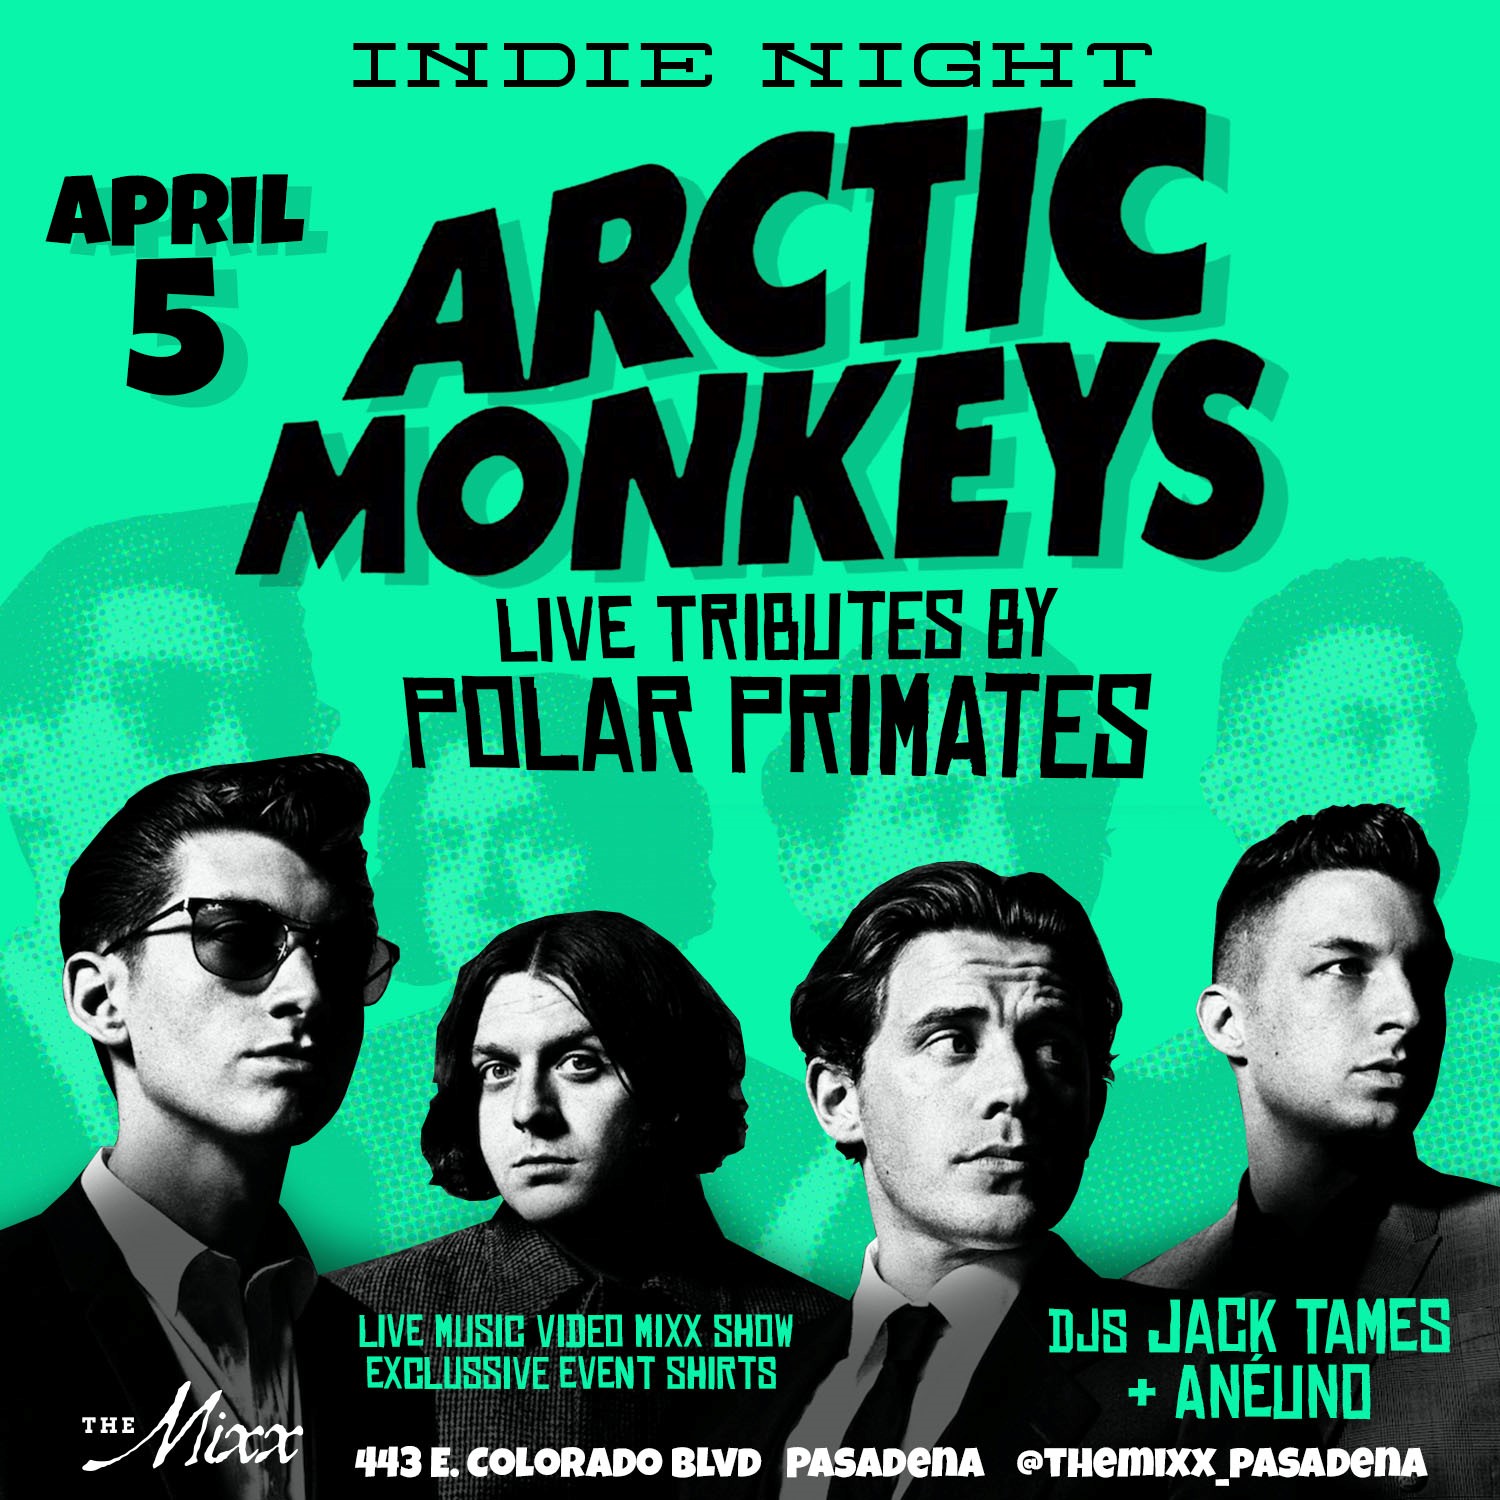 You are currently viewing INDIE NIGHT with Live Tribute to Arctic Monkeys by Polar Primates